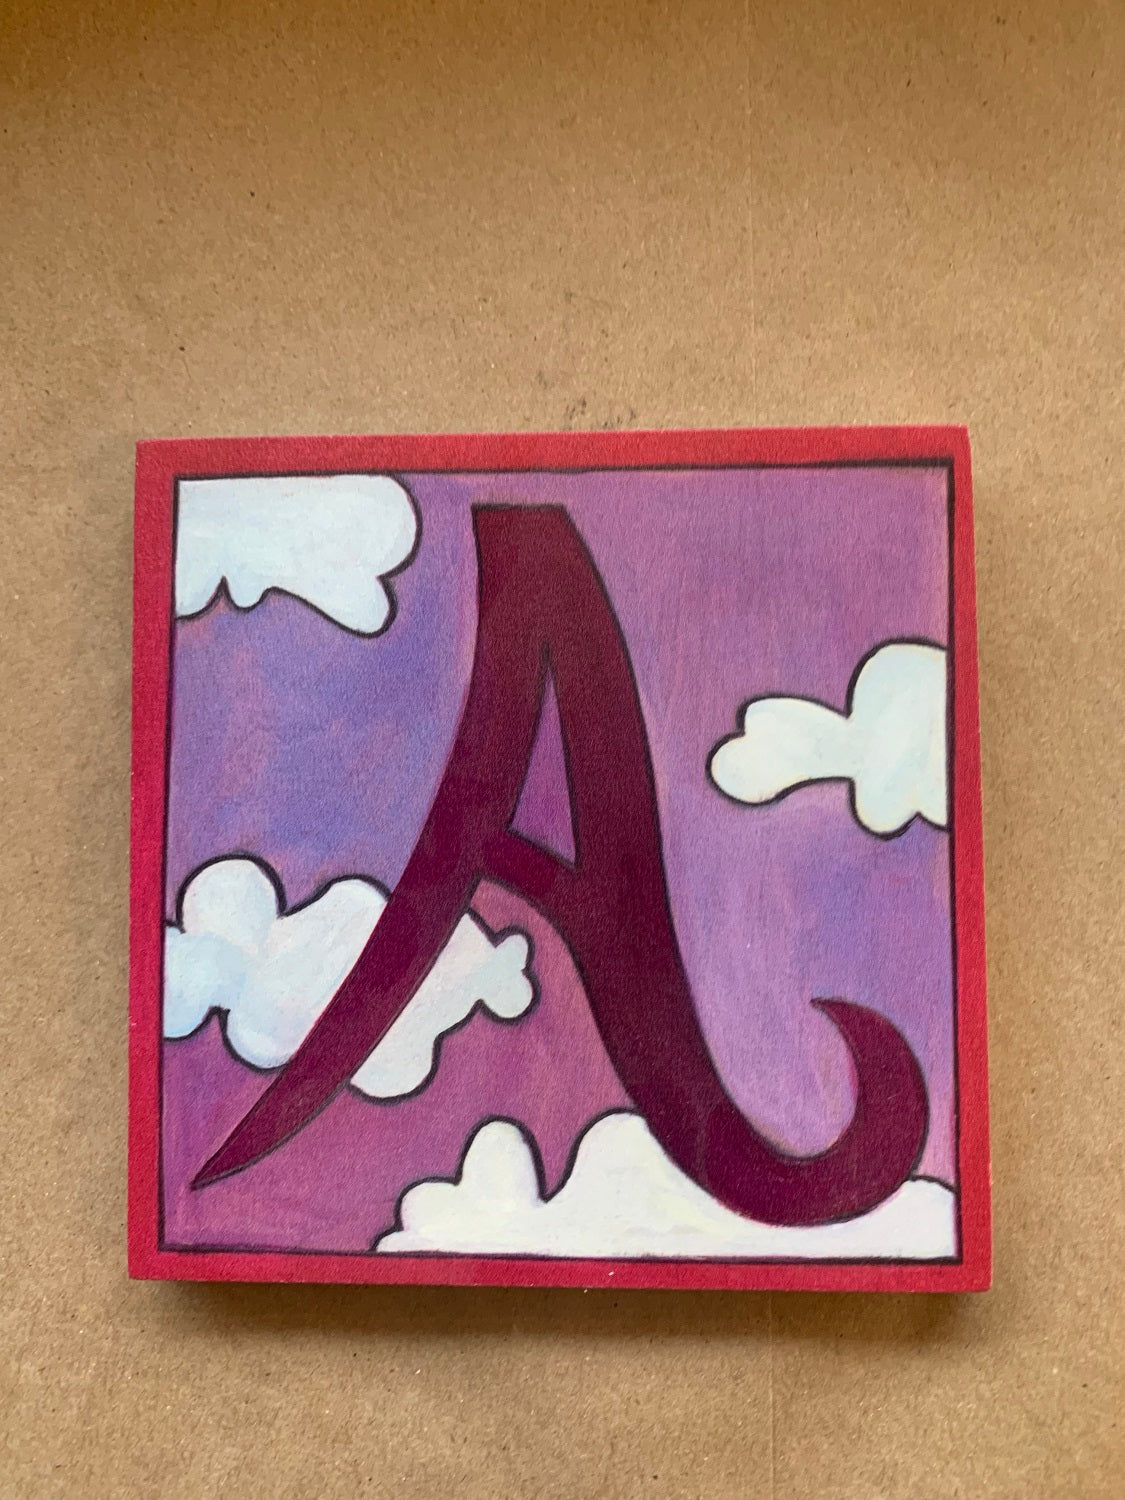 Outdoor Love Letters 5X5 "A"